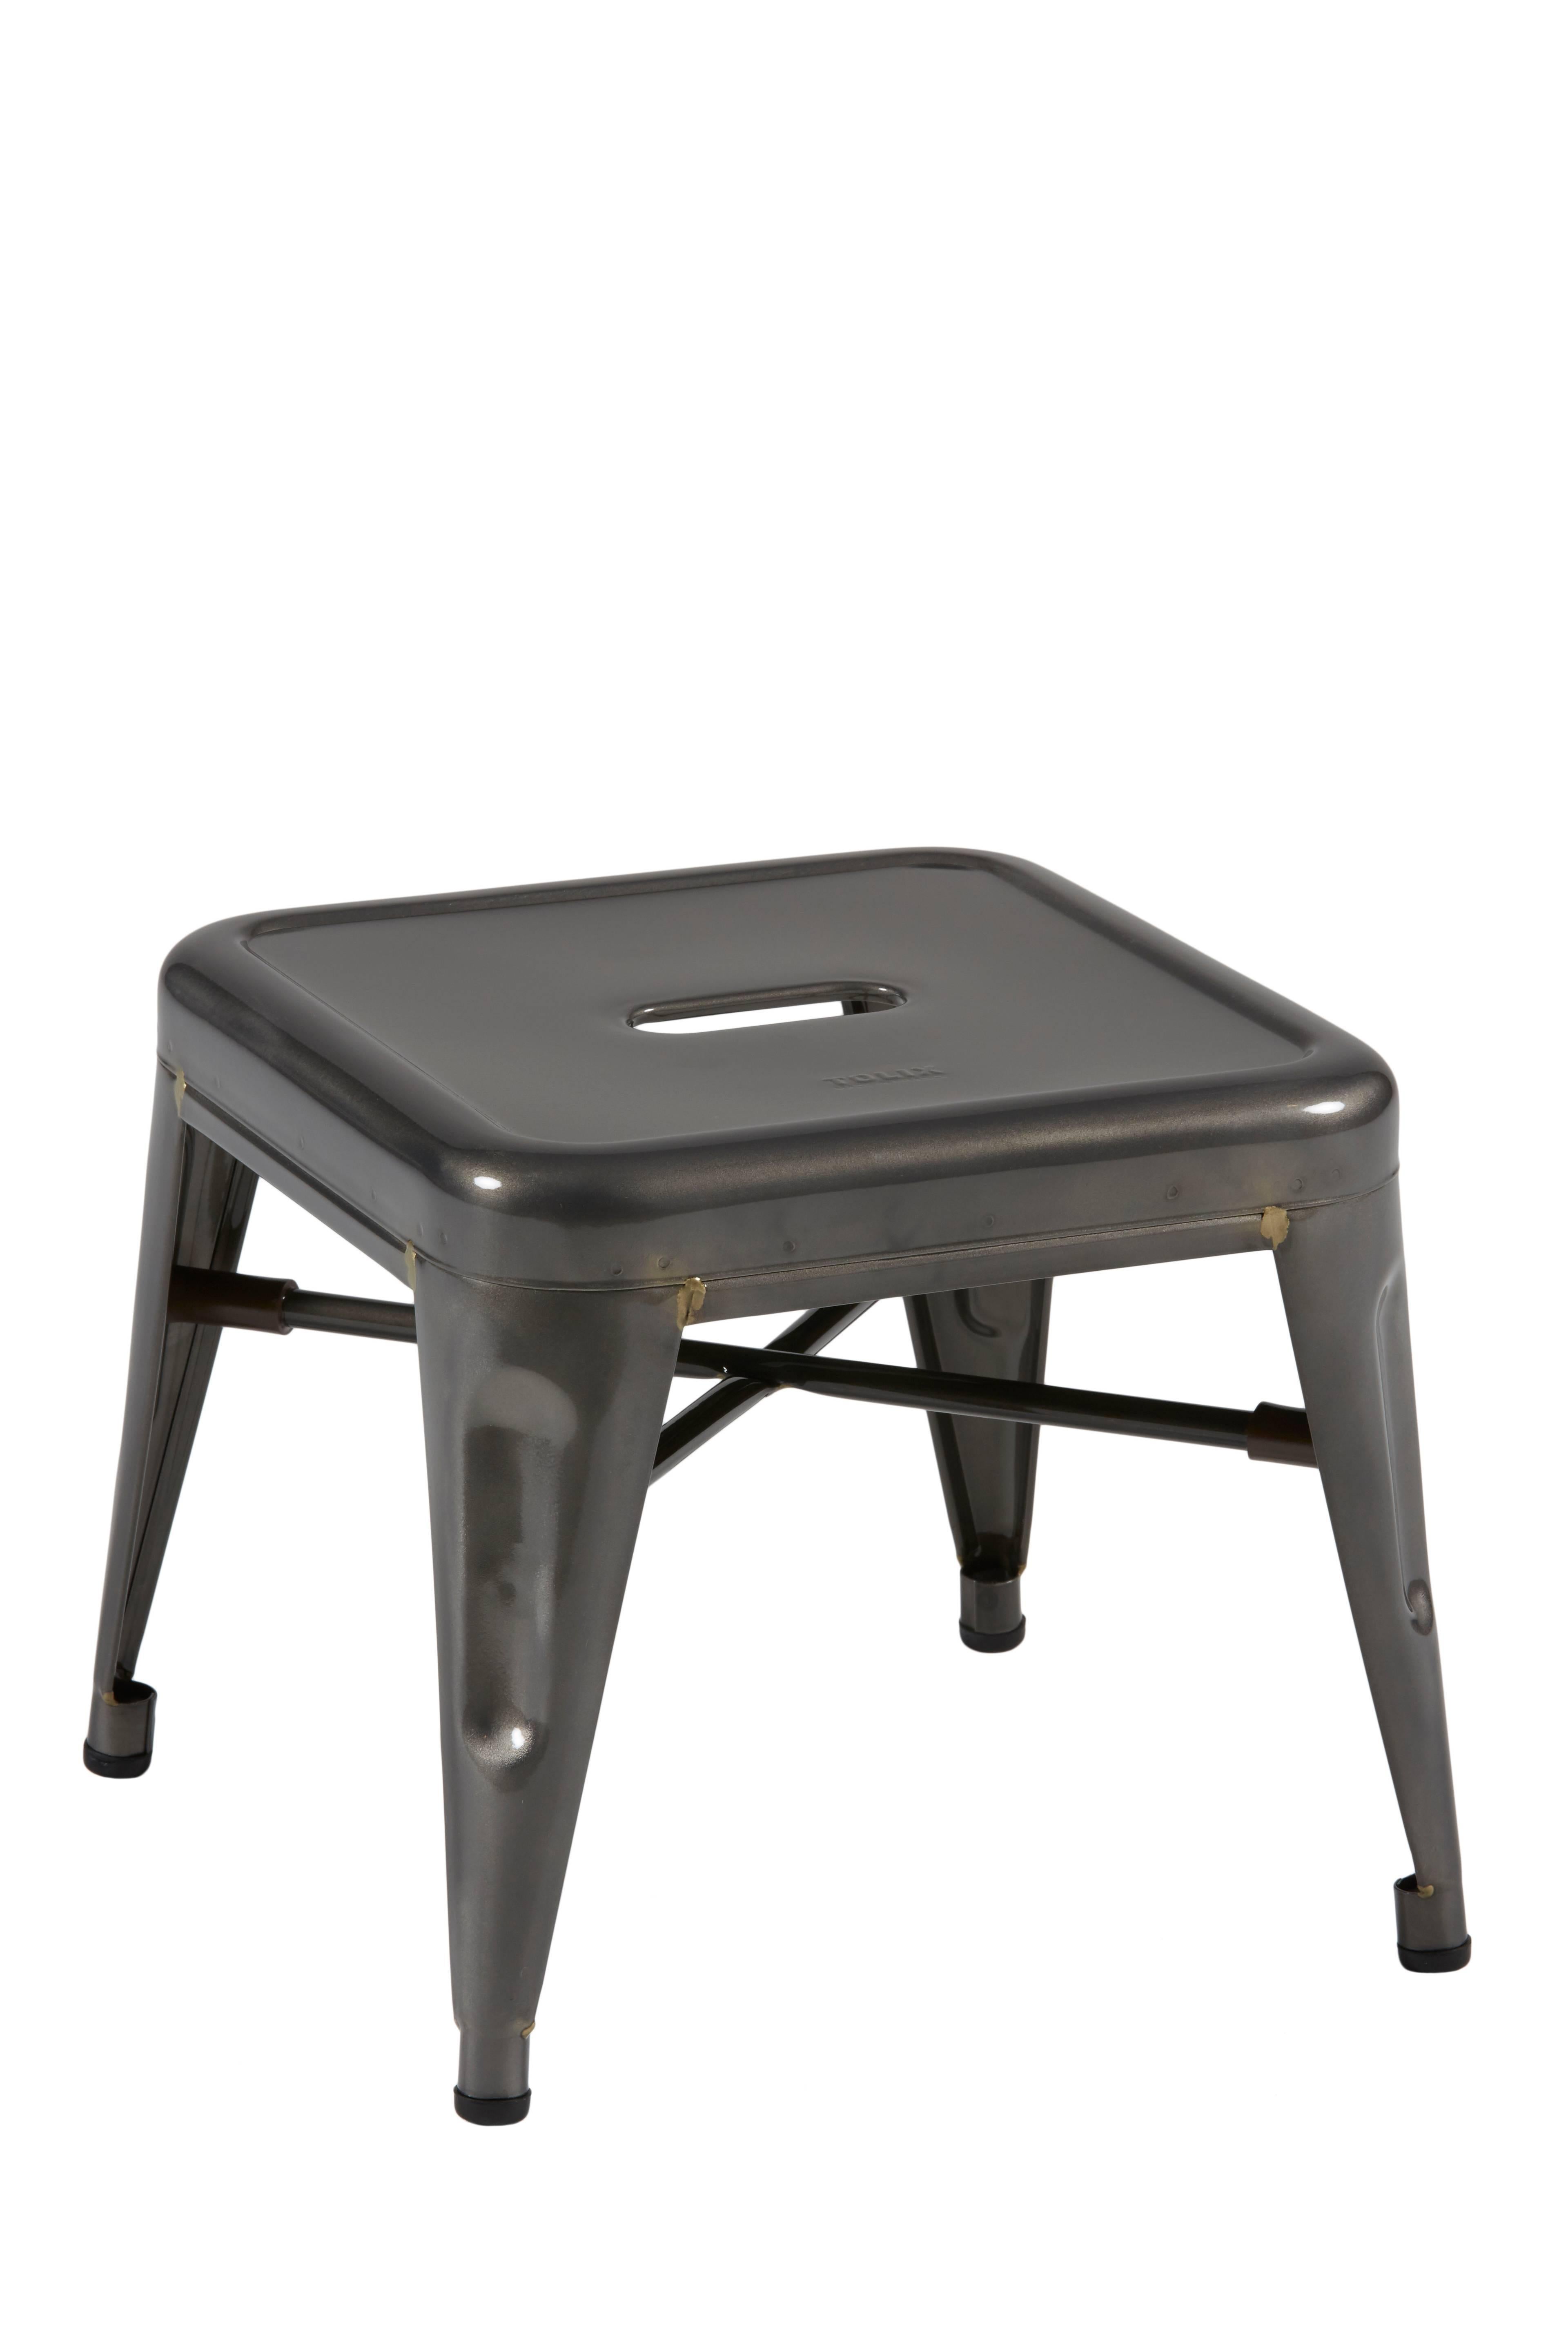 The H30 stool is the little version of the legendary “H” stool from Tolix, an emblem of the industrial esthetic that developed in the 1940s. The H30 has the same shape and characteristics: simplicity, highly resistant to wear and stackable. The low